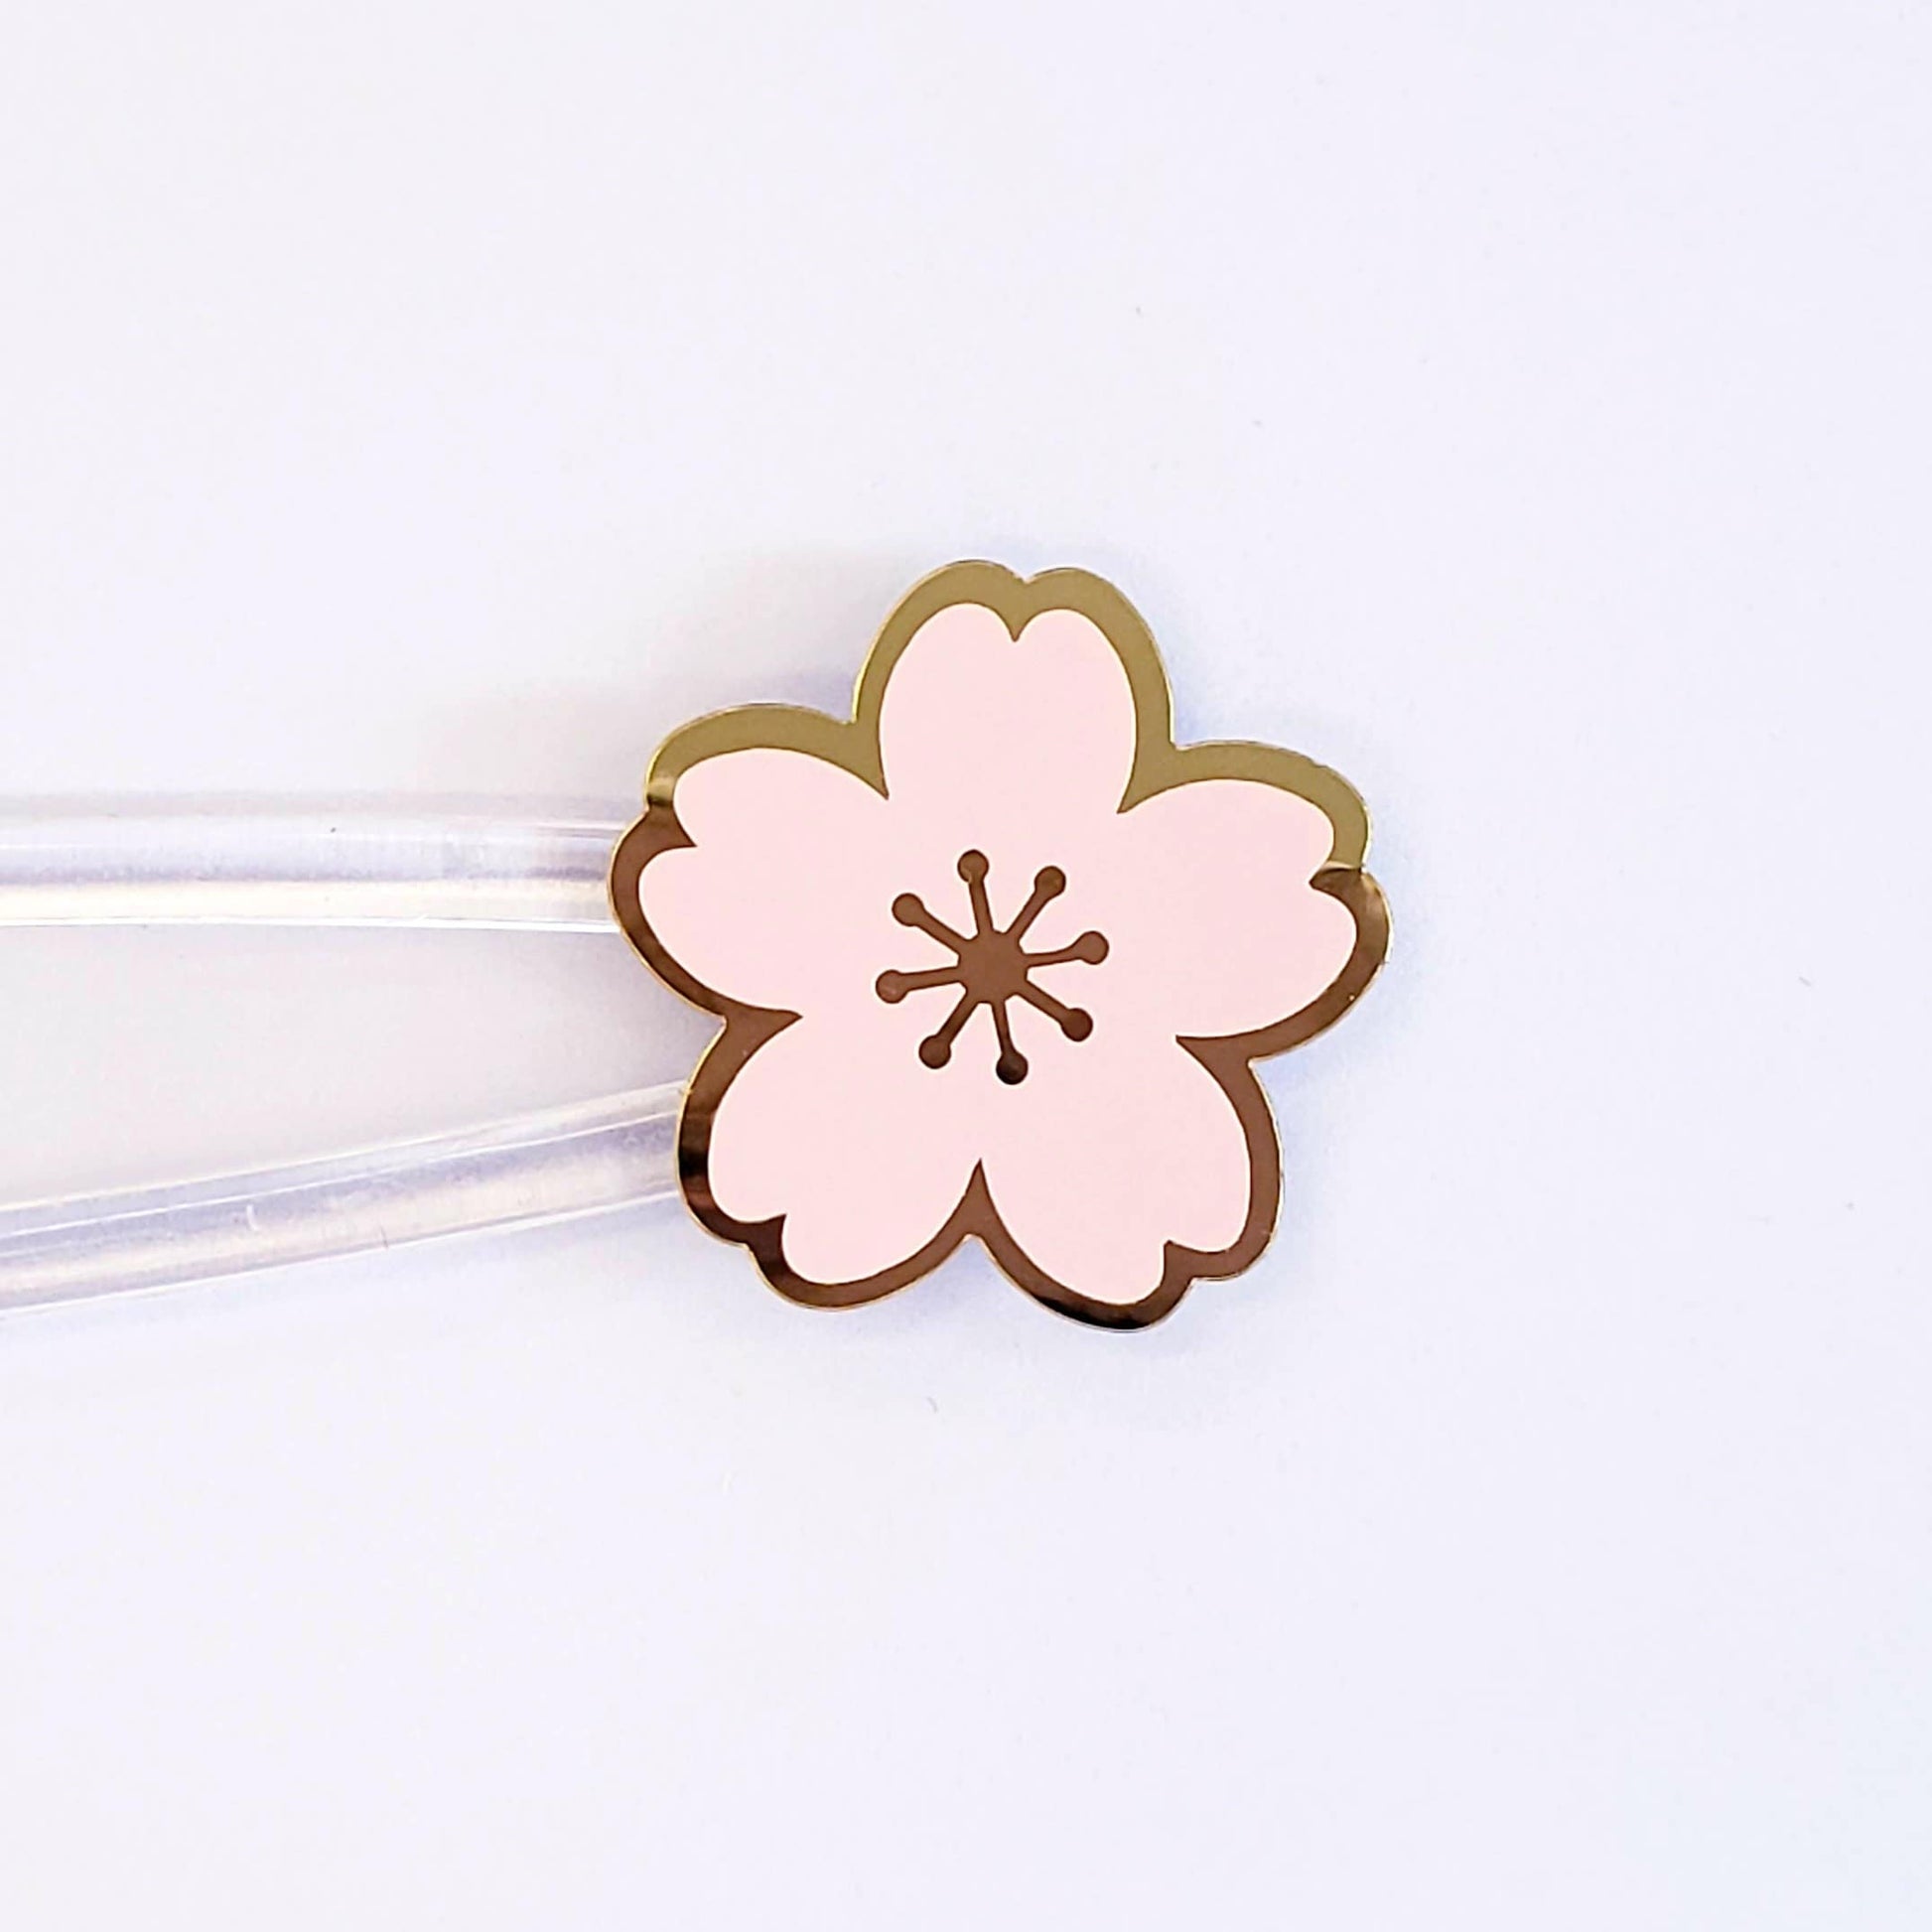 Sakura Flower Stickers, set of 35 blush pink and gold cherry blossom stickers for spring weddings, Mother's day gift and scrapbook pages.